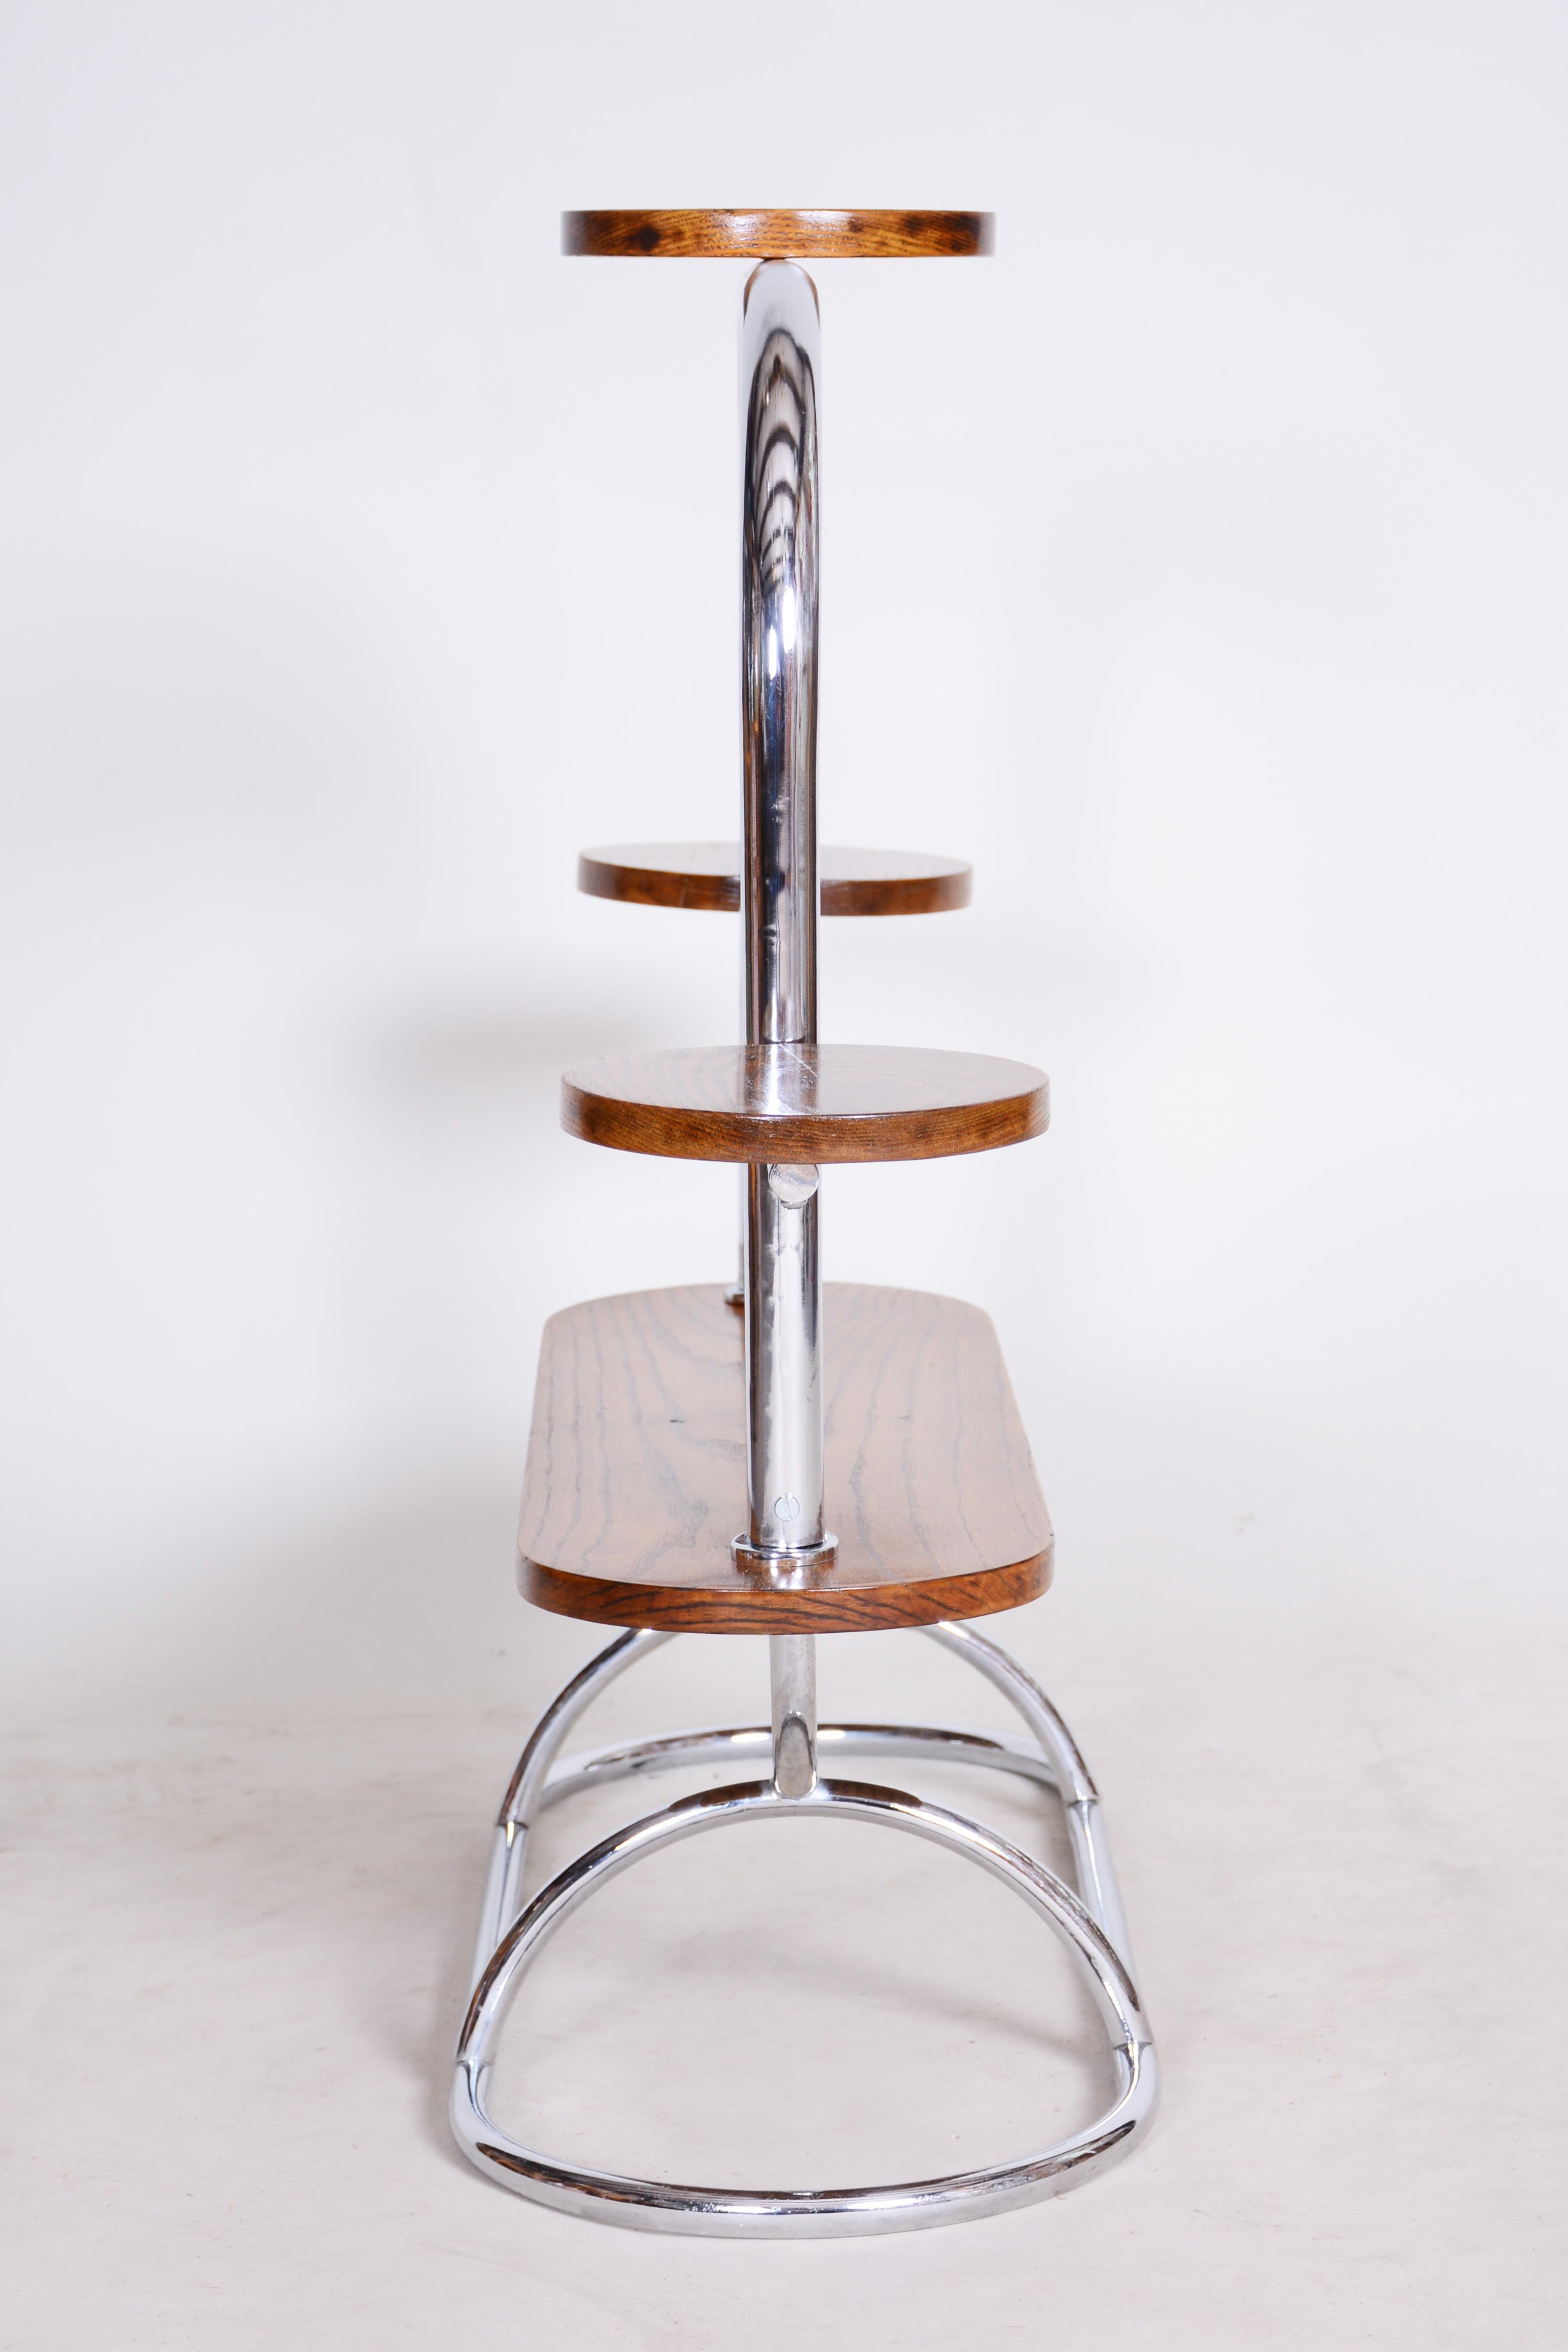 Czech Bauhaus Chrome Flower Stand Made Out of Oak, Lacquered, 1930s For Sale 3